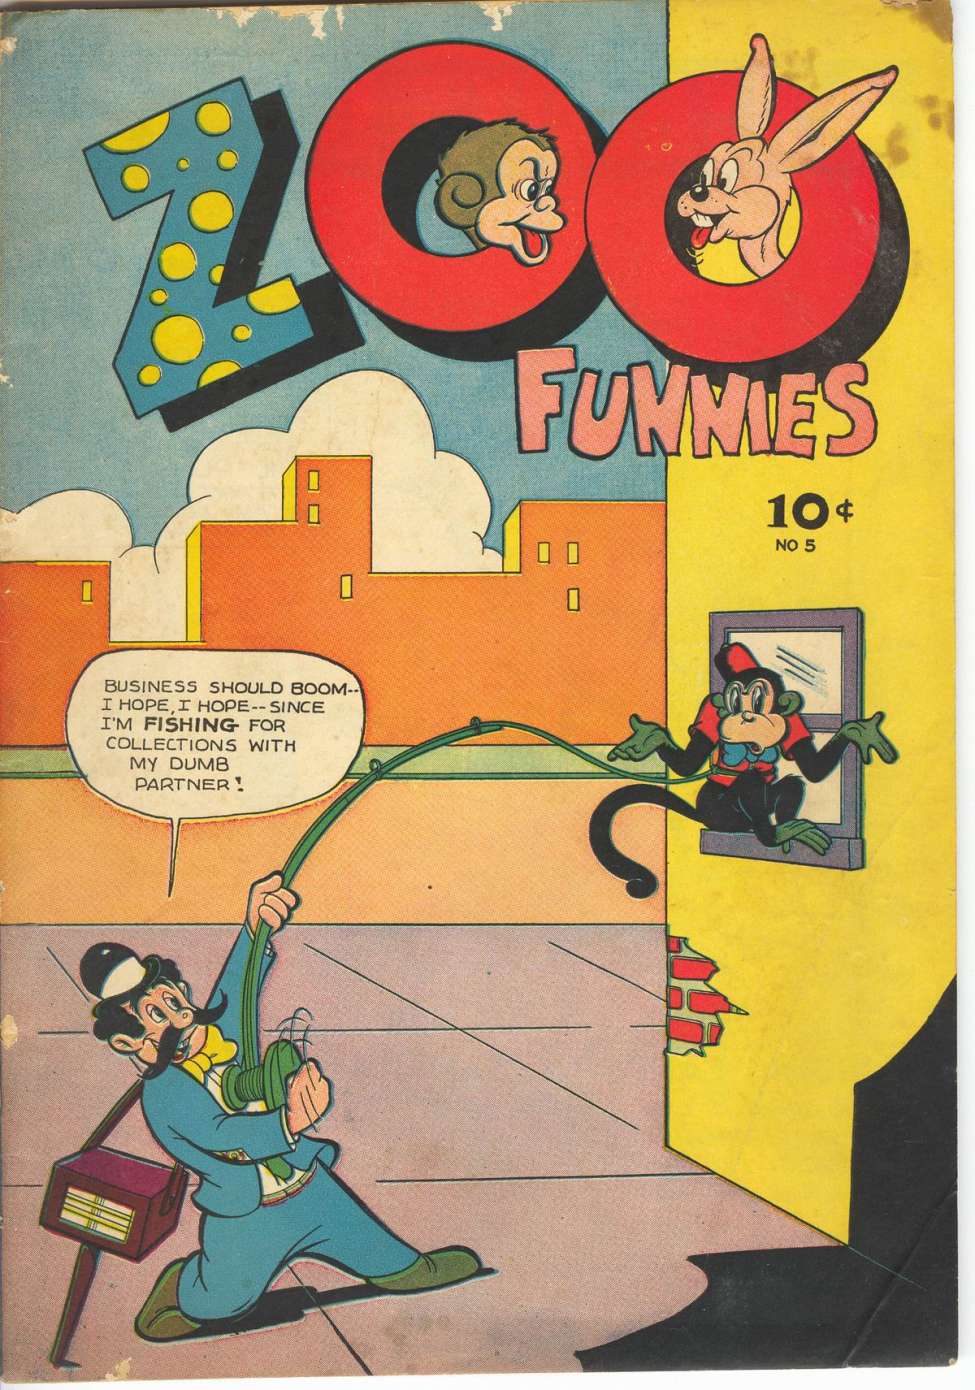 Book Cover For Zoo Funnies v1 5